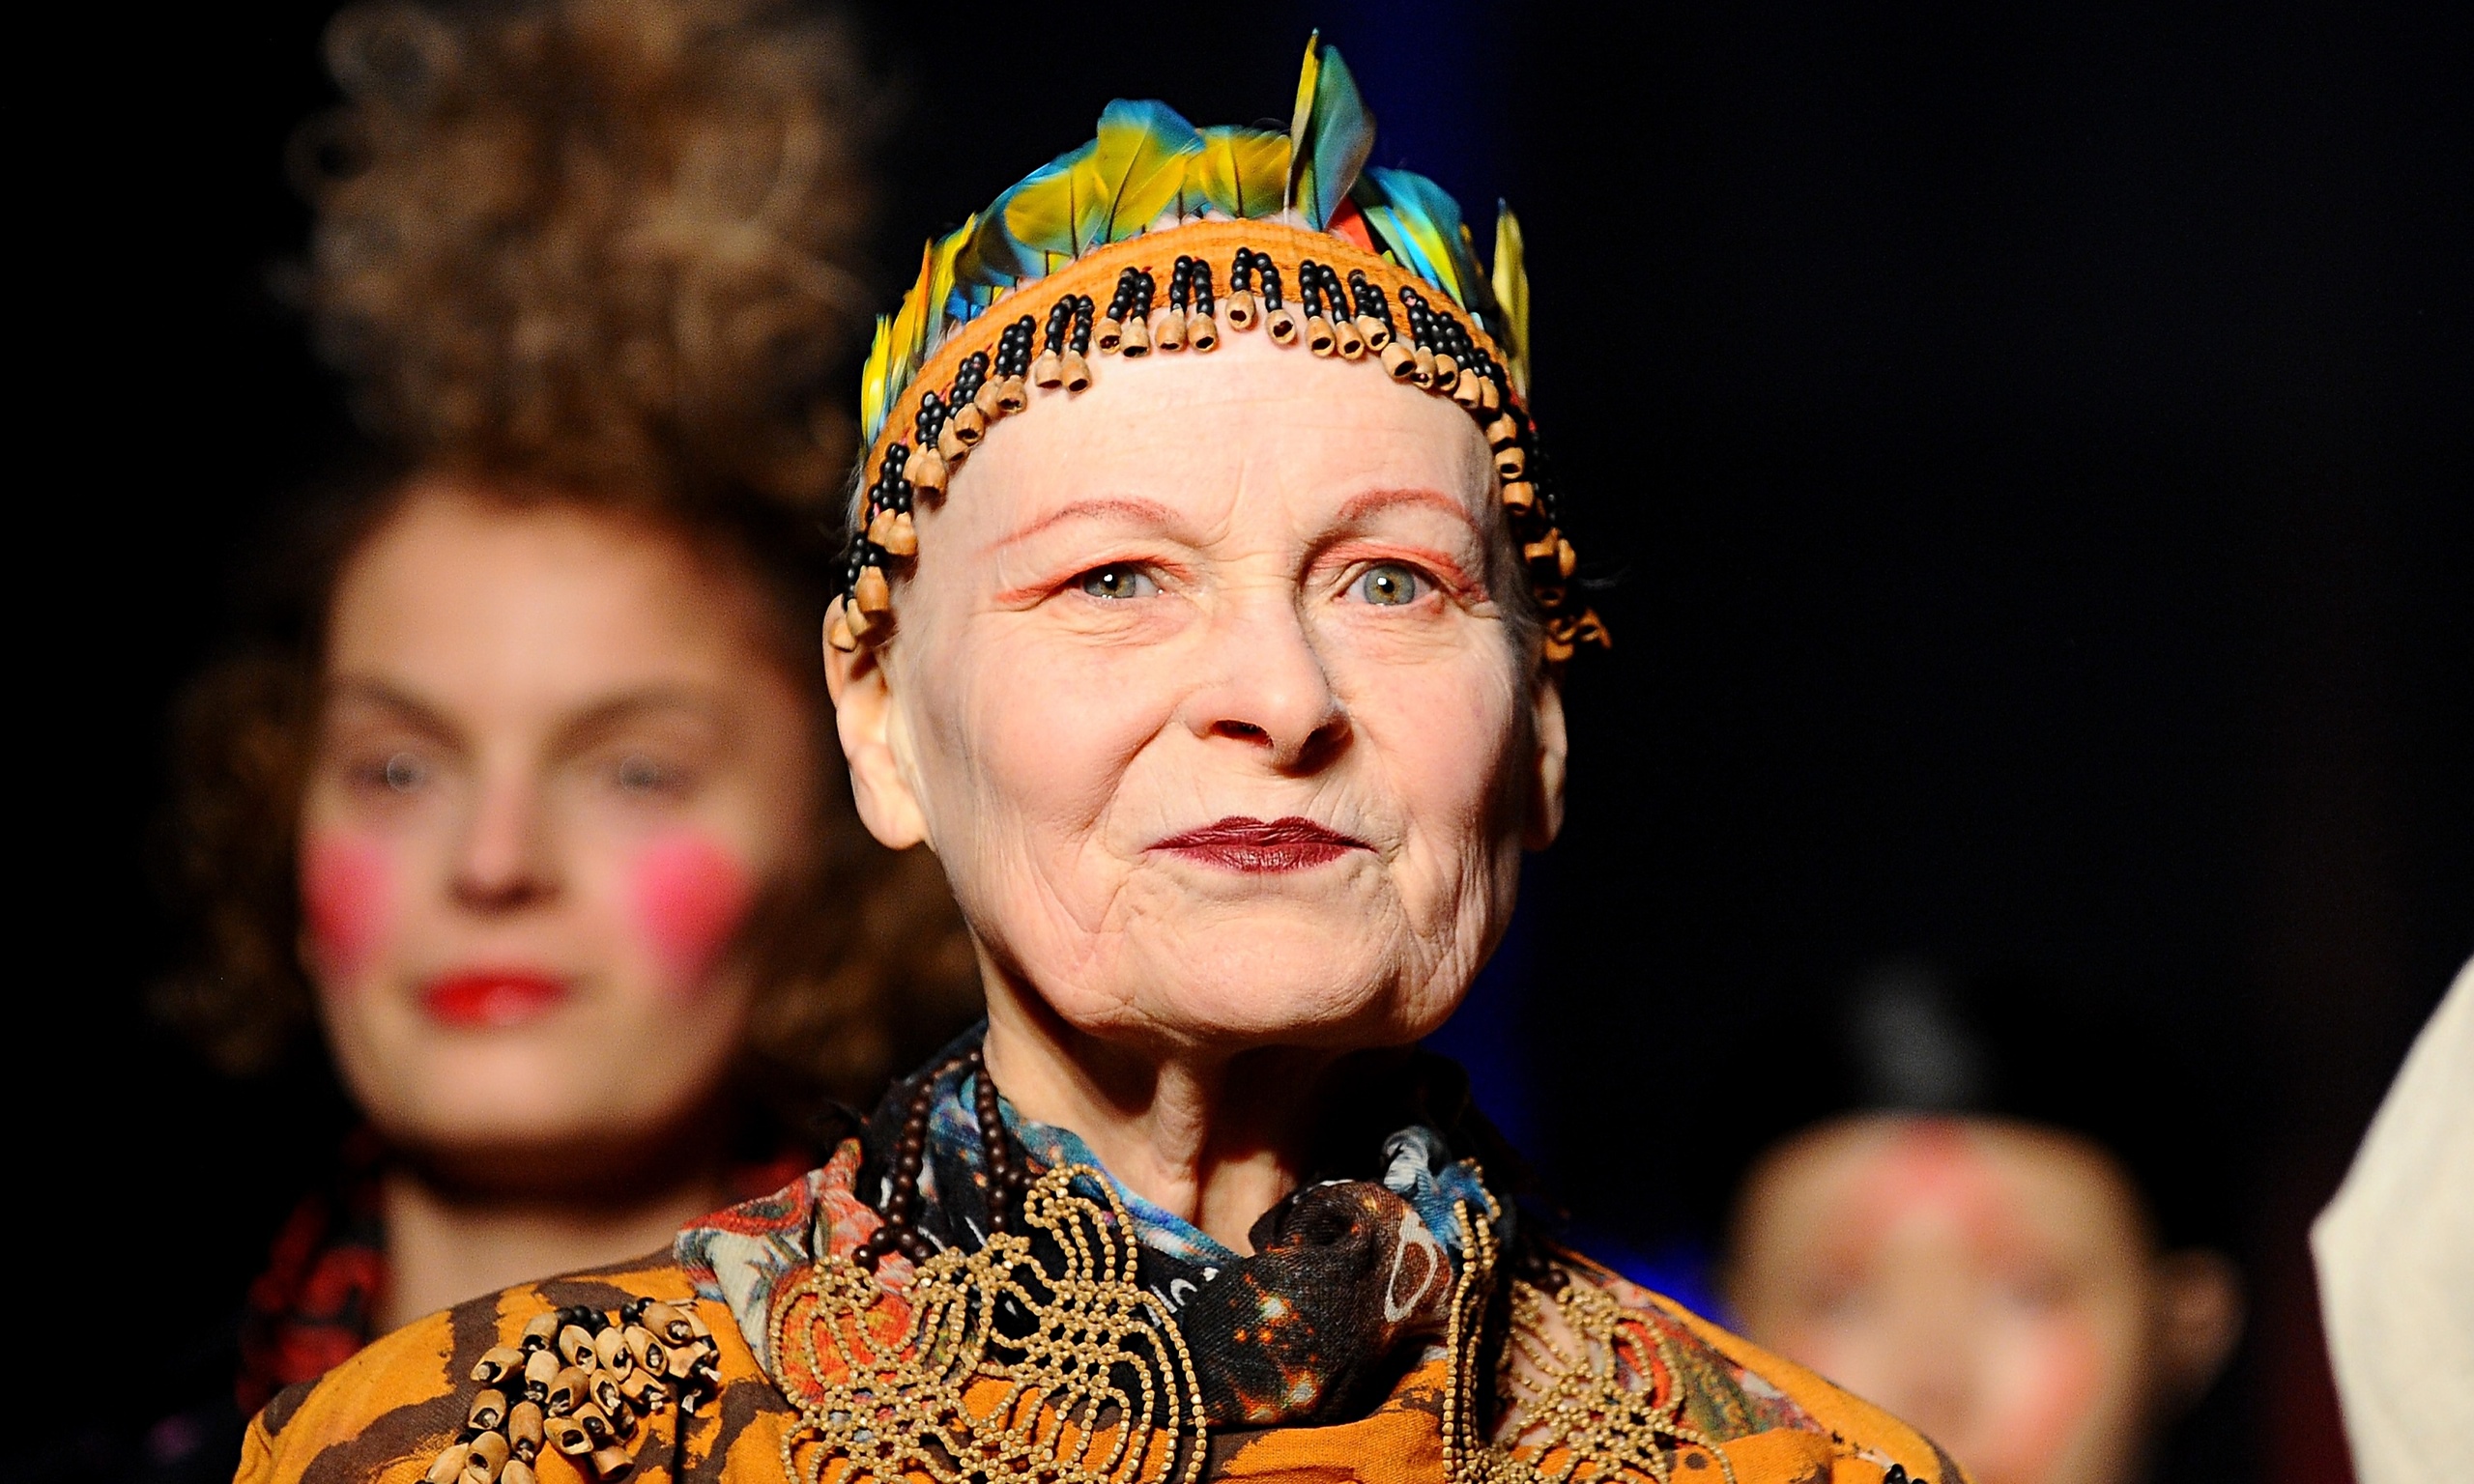 Vivienne Westwood bucks tradition with show at Parisian church